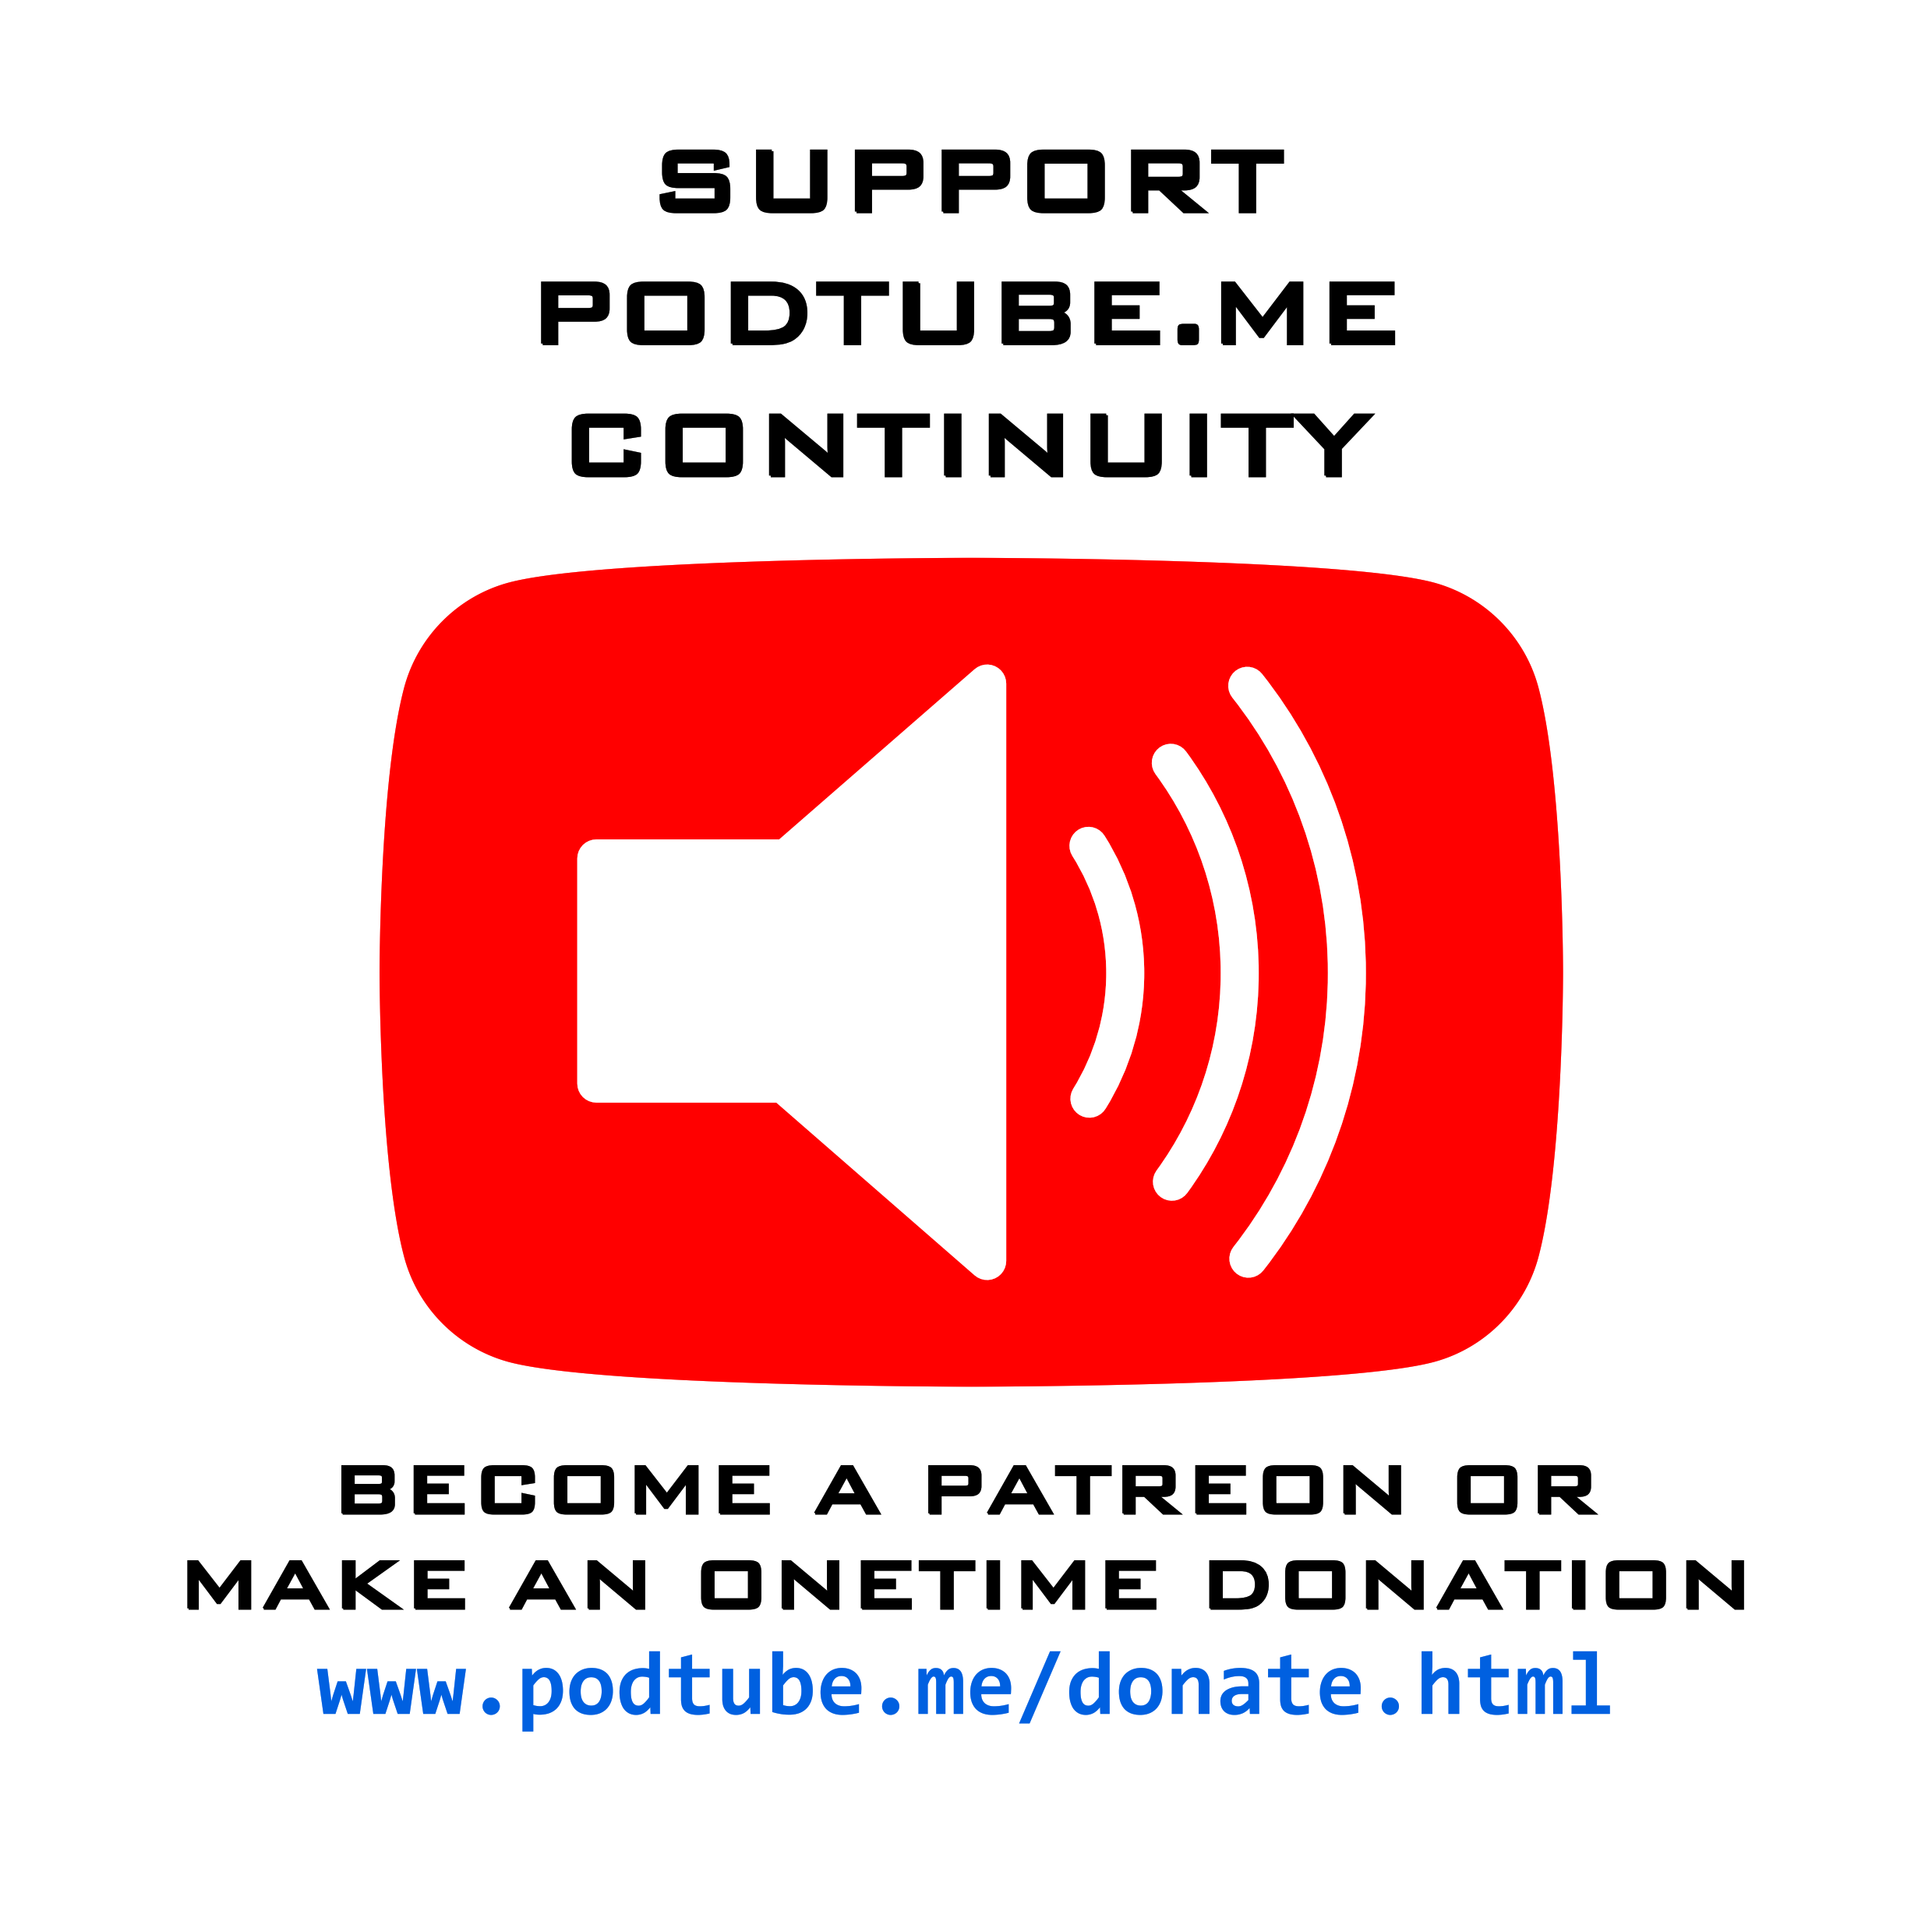 Support PODTUBE.ME continuity as a free service